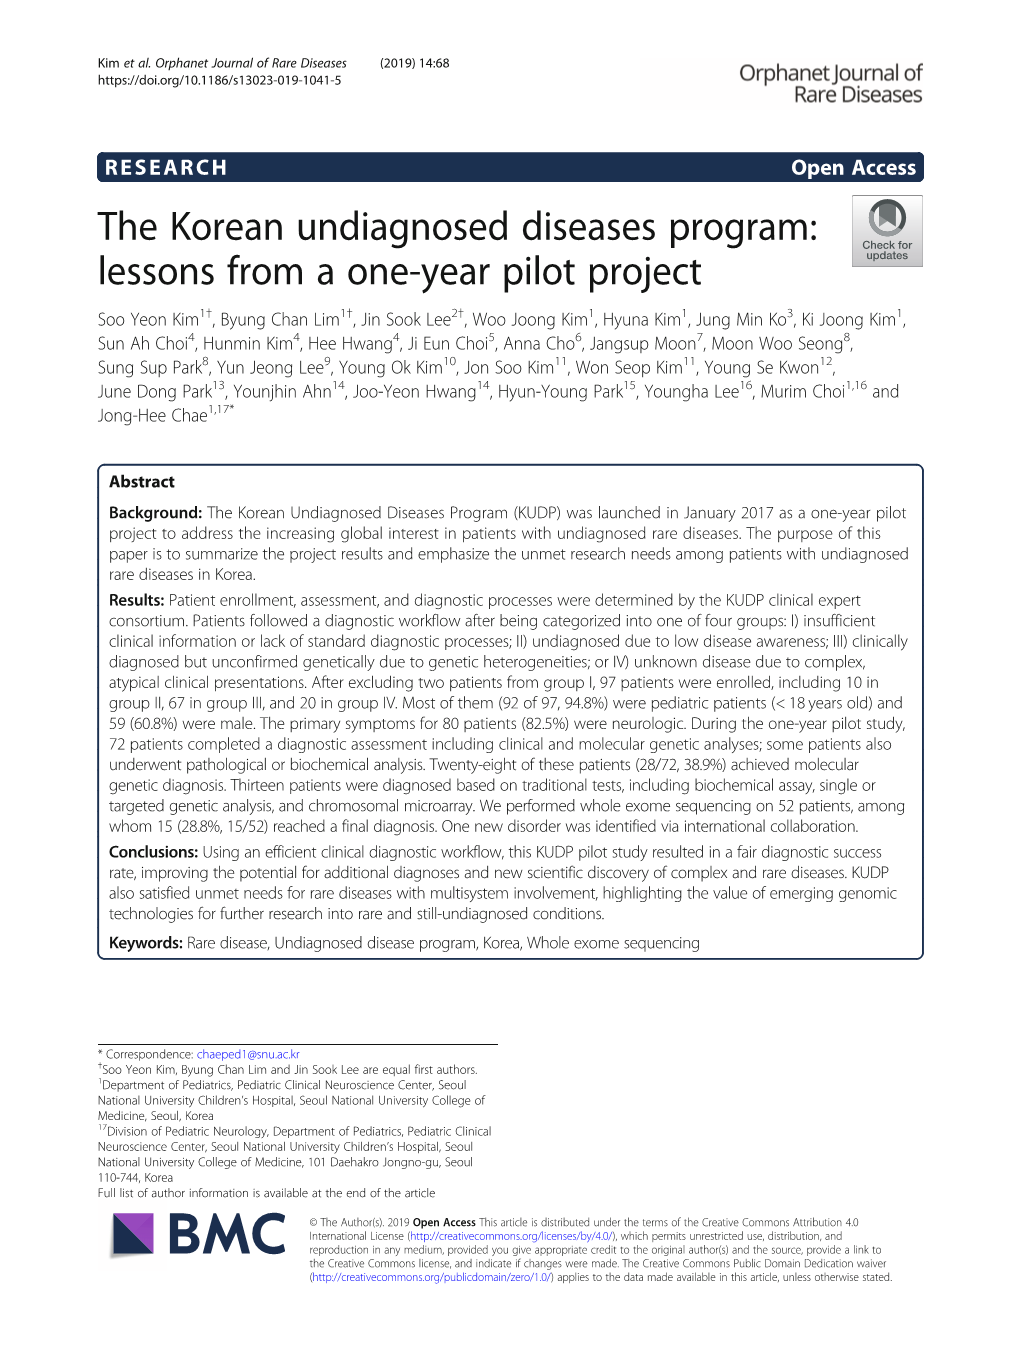 The Korean Undiagnosed Diseases Program: Lessons from a One-Year